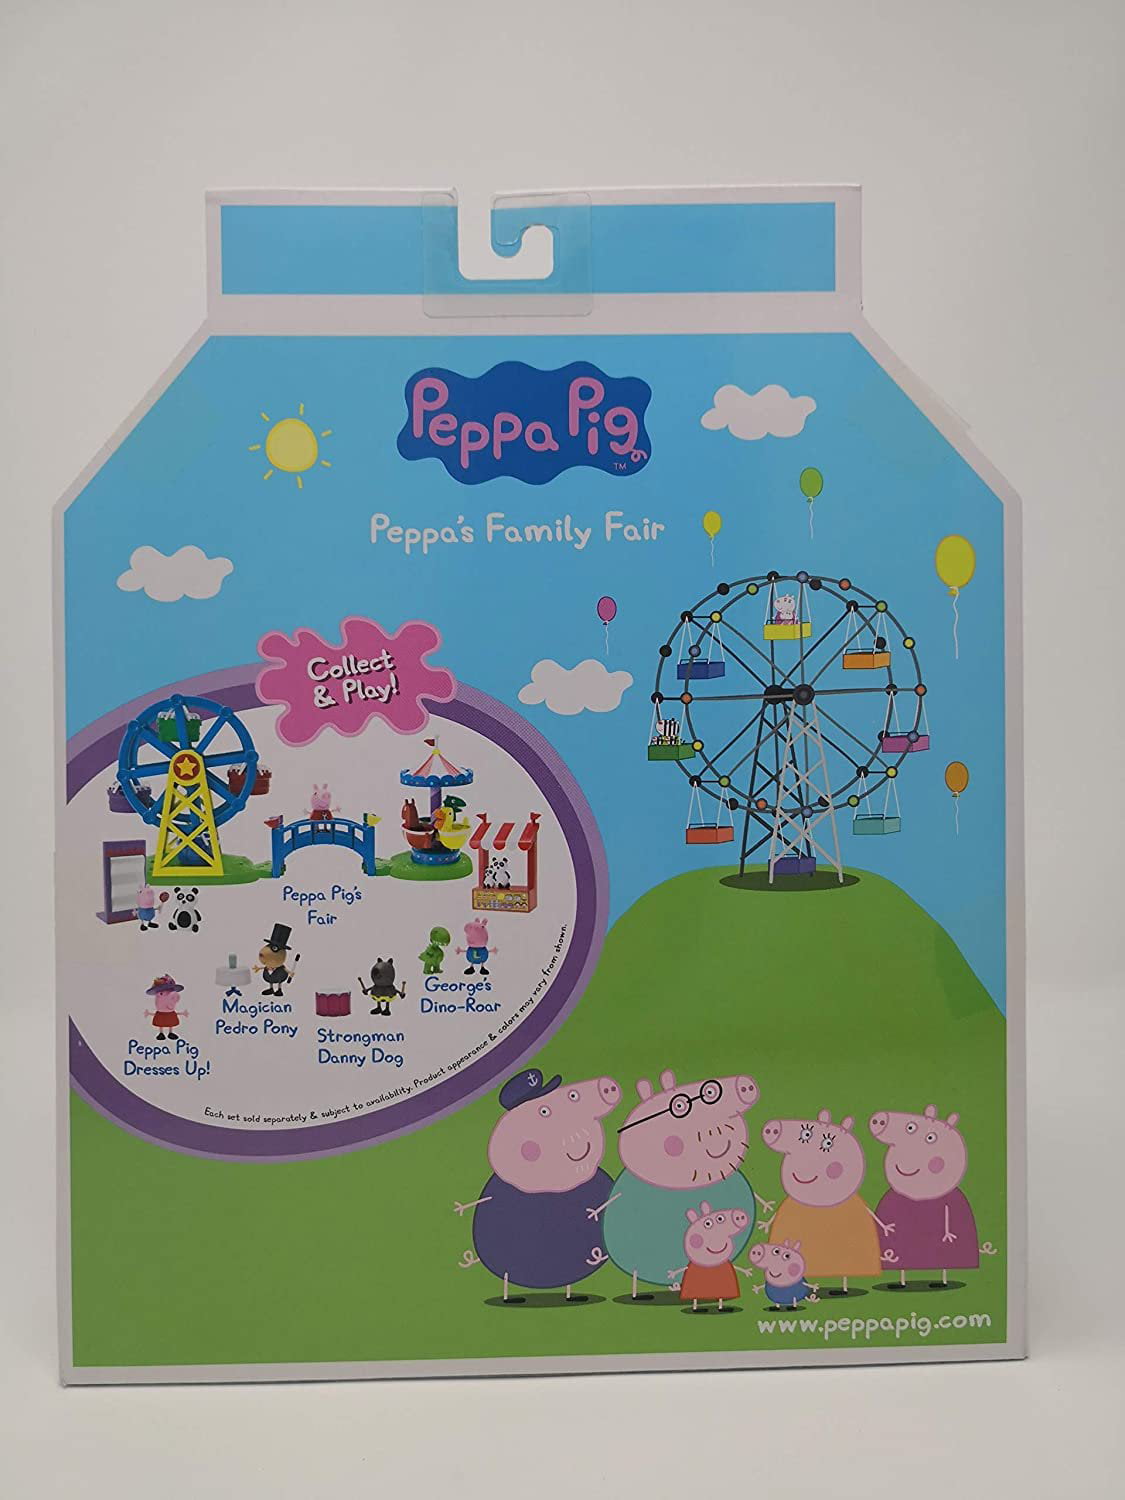 PEPPA PIG Peppa's Grandparents House Play Set Toy RARE! Ages 3+